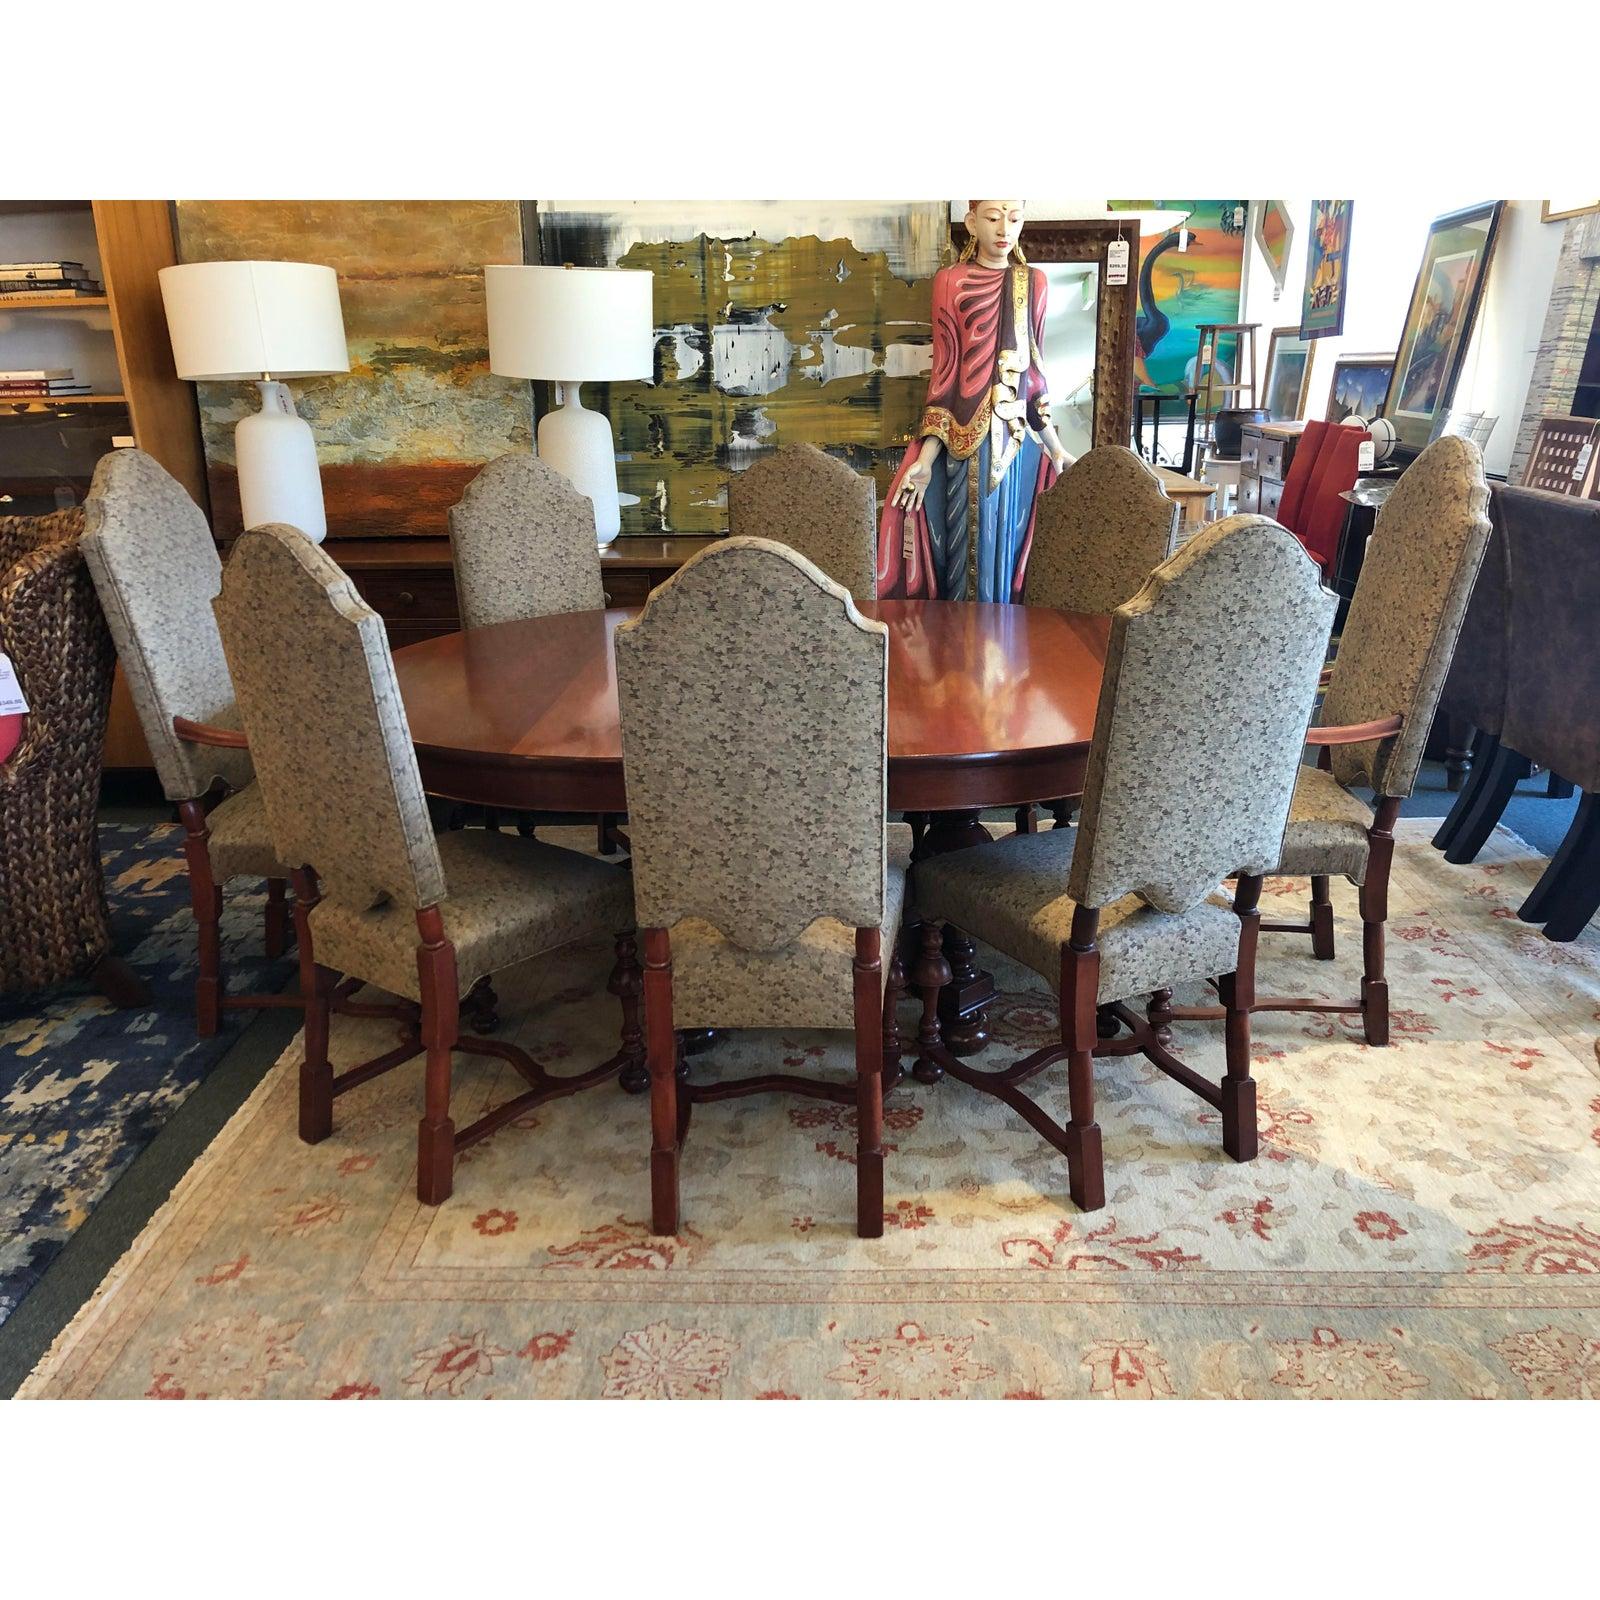 A Jacobean dining set. Silhouettes reference traditional English style in a warm transitional form. Contract grade leaf patterned fabric add an organic and durable touch to eight dining chairs. Scrolled woodwork showcased on the arms of two